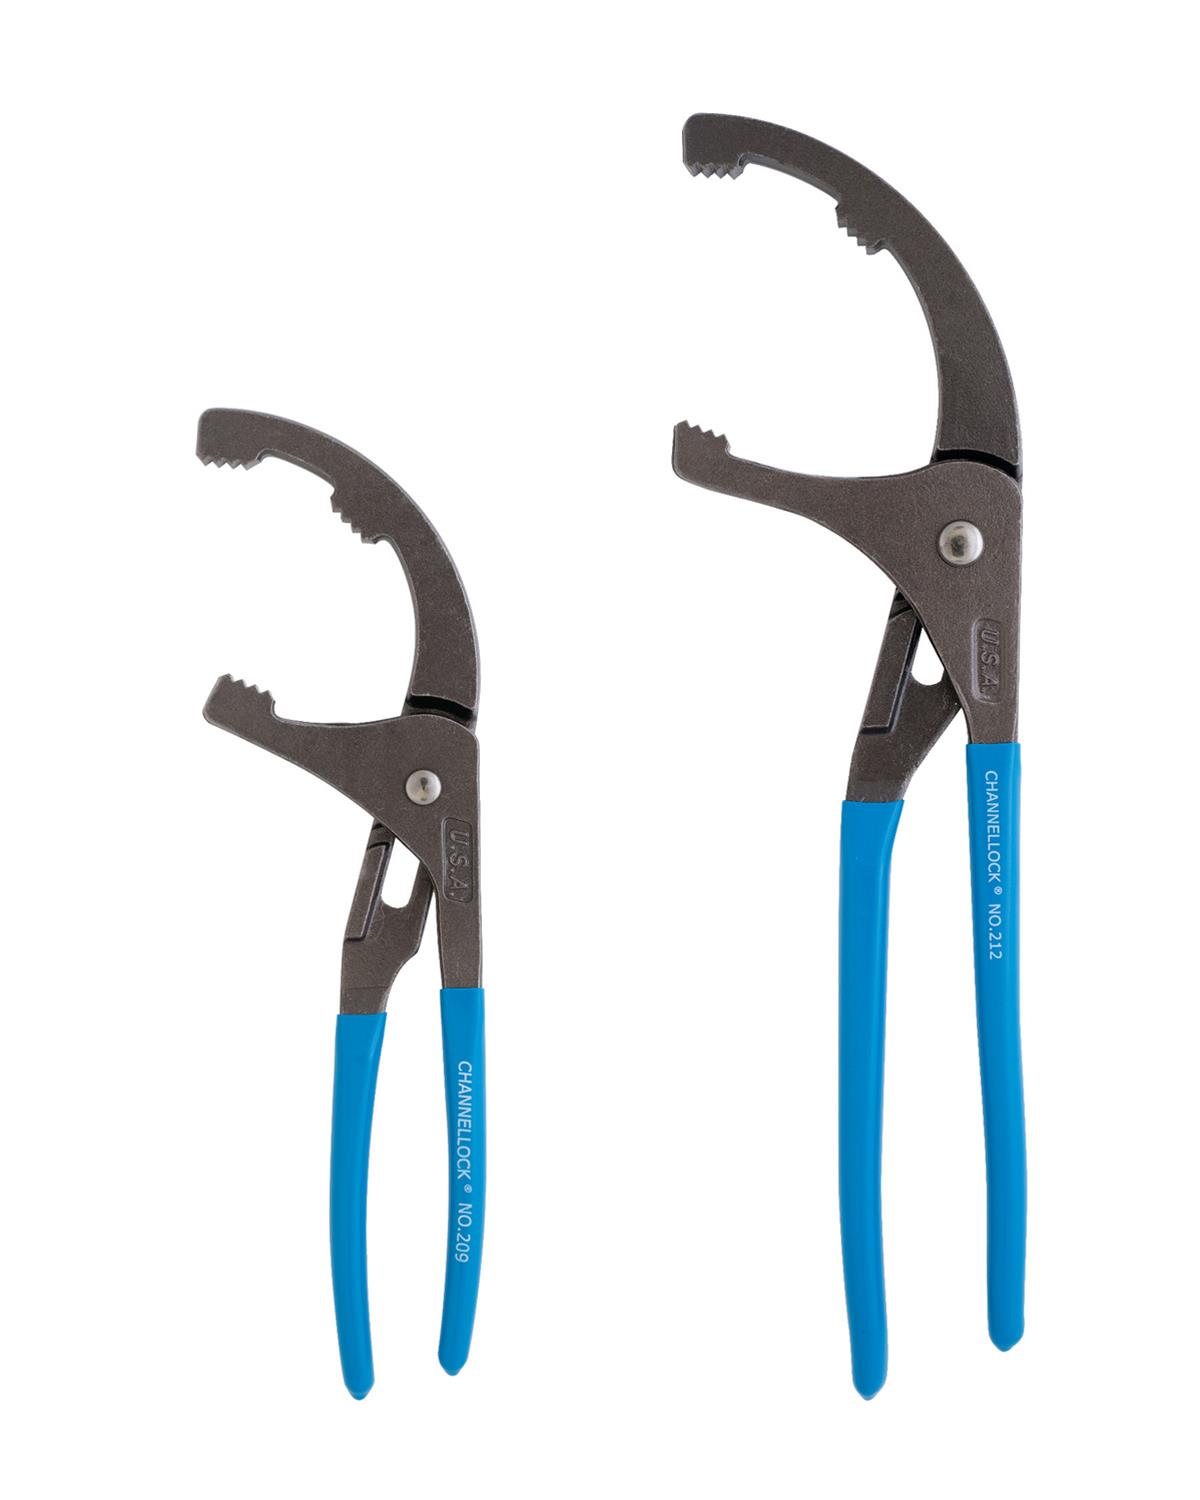 Channellock OF-2 CHANNELLOCK Oil Filter Pliers